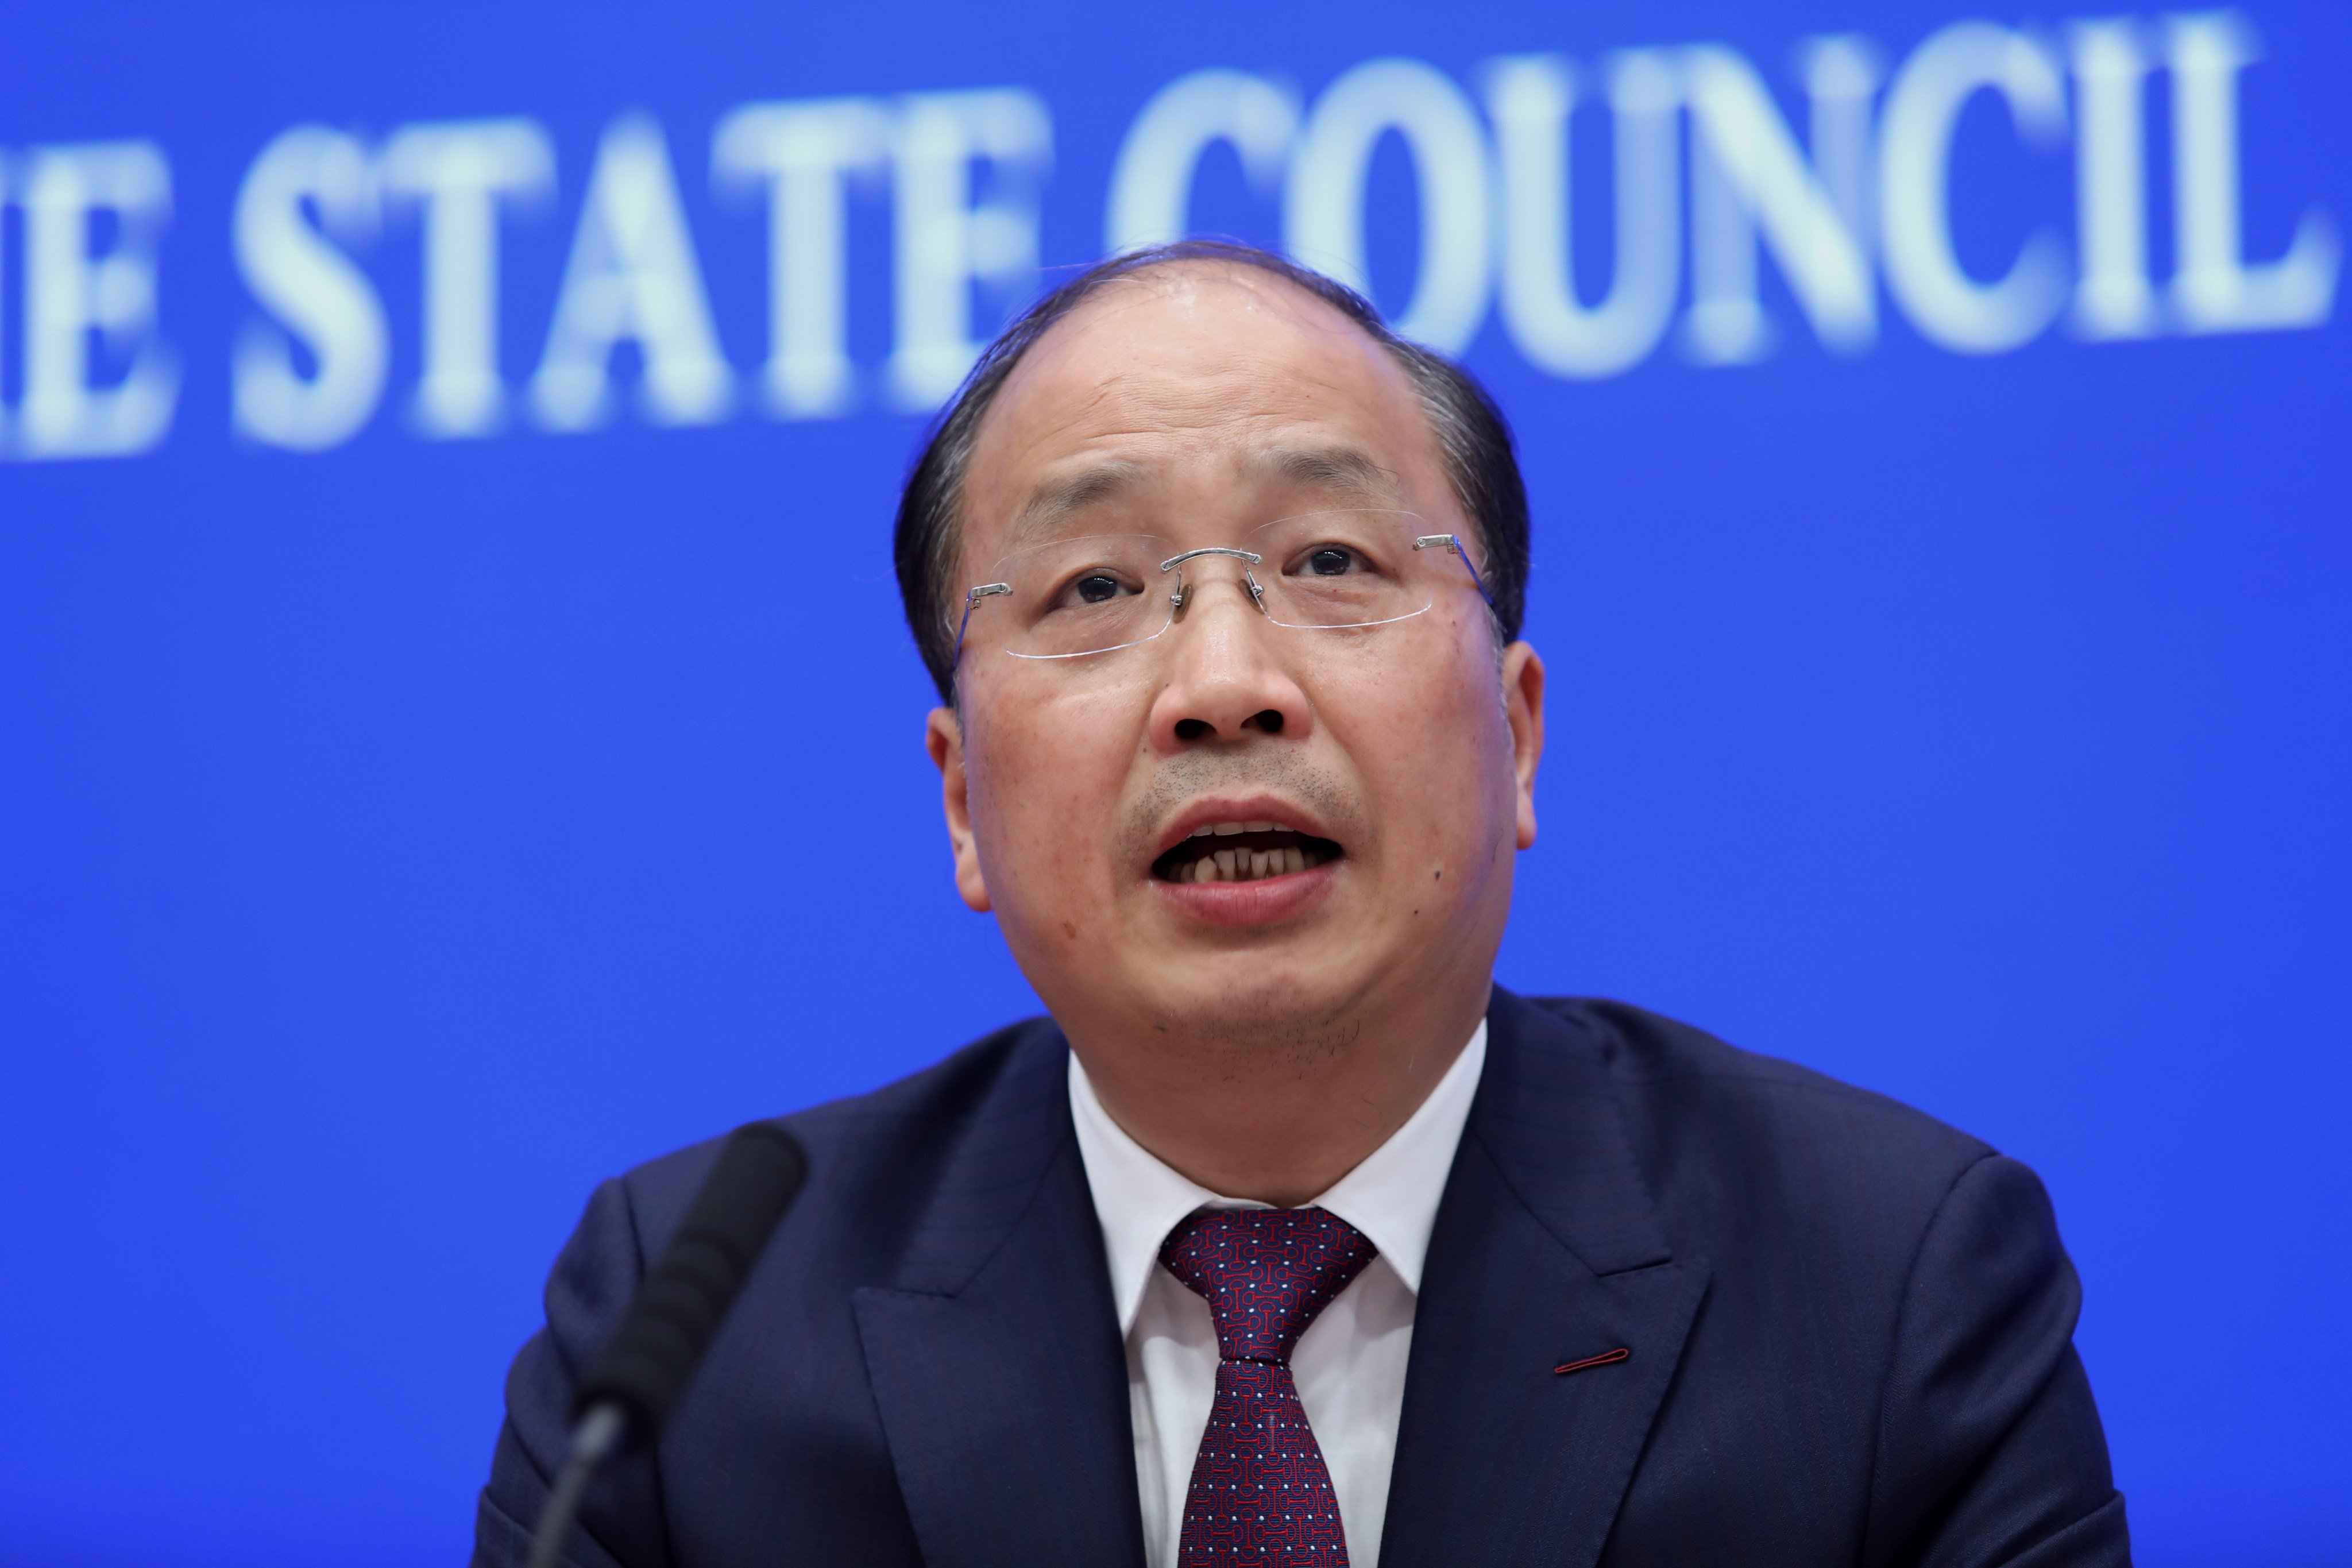 ‘We will build a capital market with Chinese characteristics so the market can allocate resources effectively,’ said Yi Huiman, chairman of the CSRC. Photo: Simon Song